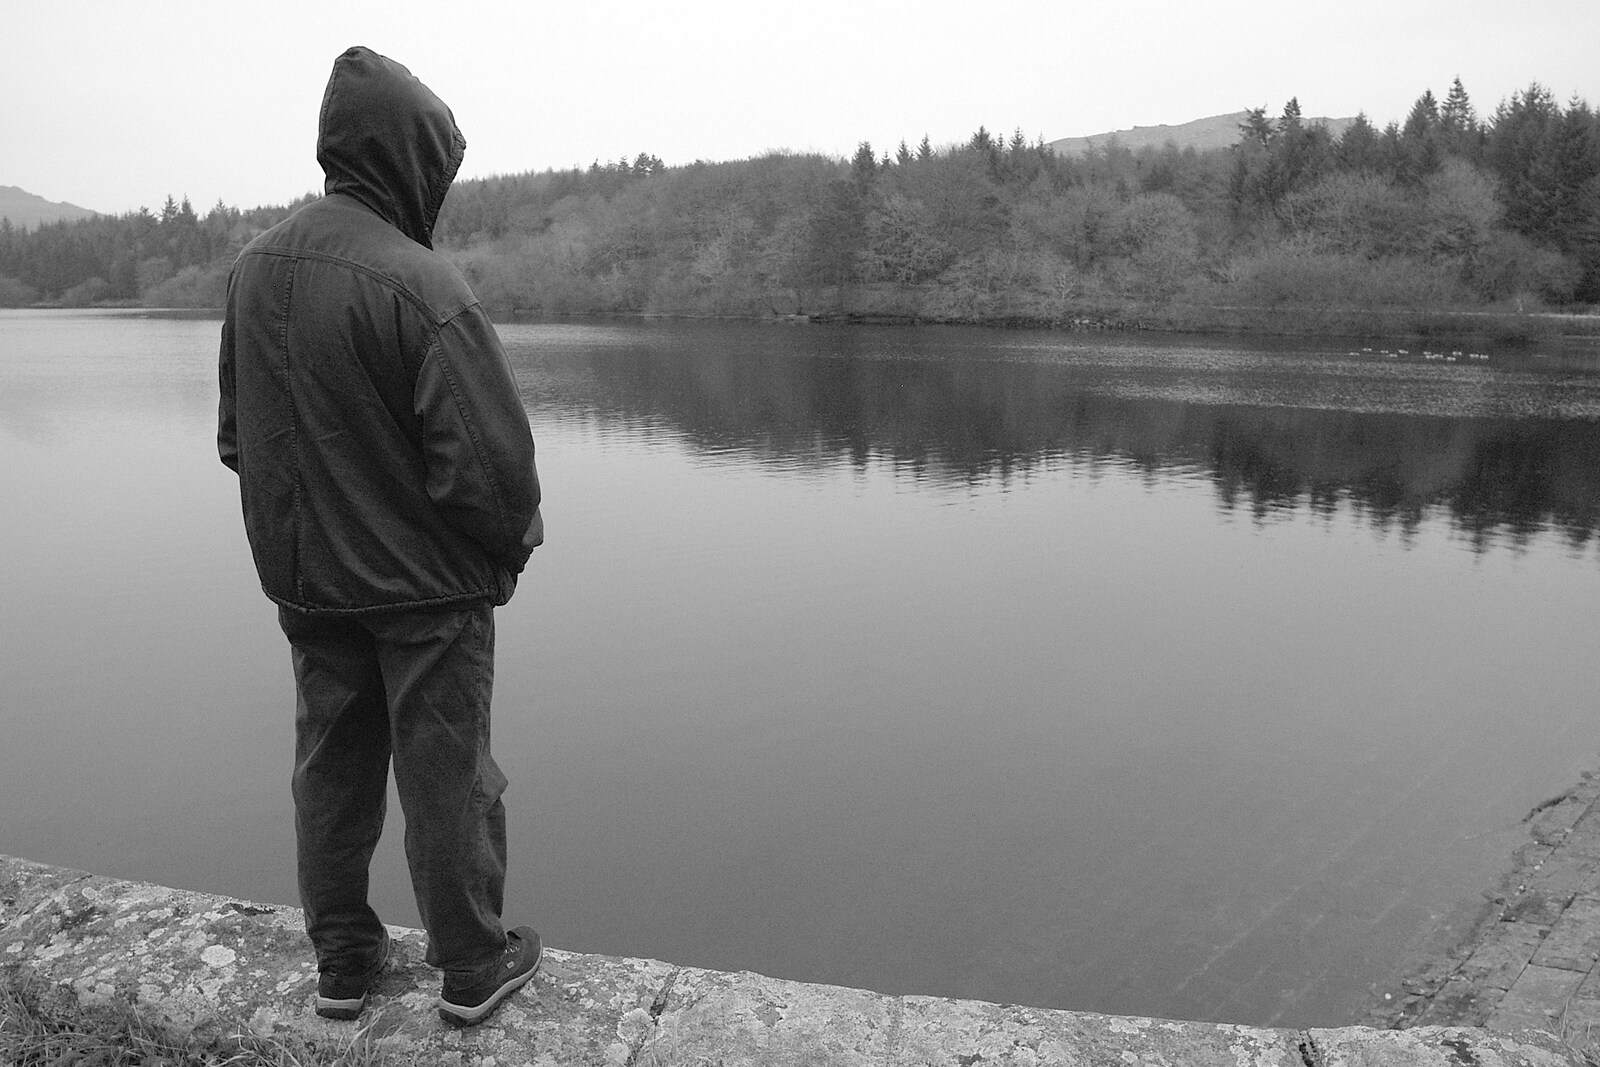 Mike stands on a wall from A Wander Around Hoo Meavy and Burrator, Dartmoor, Devon - 18th December 2005